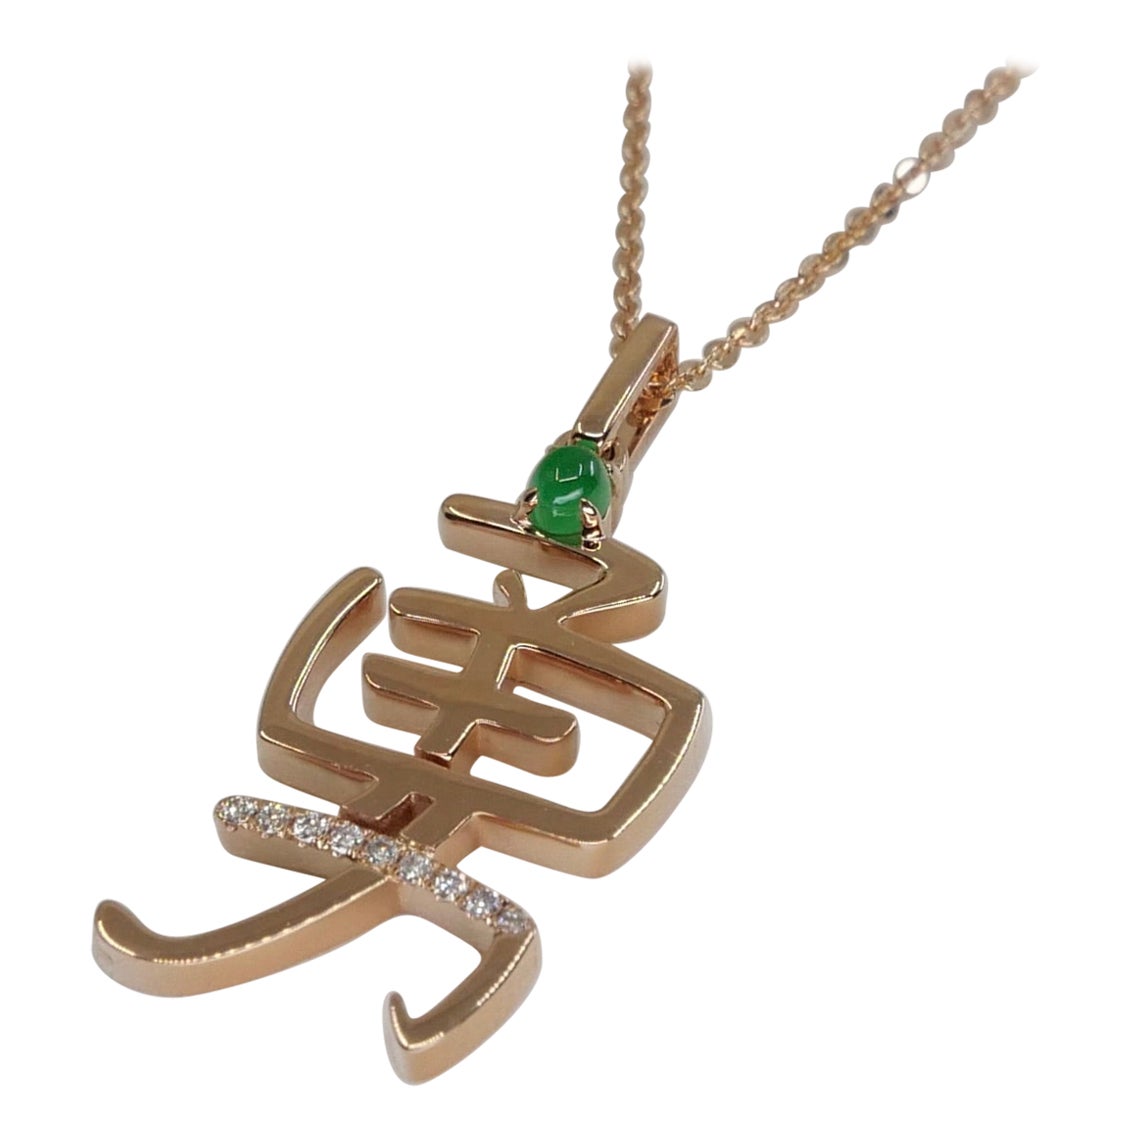 Certified Jade & Diamond Courage Pendant, 18k Rose Gold. Imperial Green 